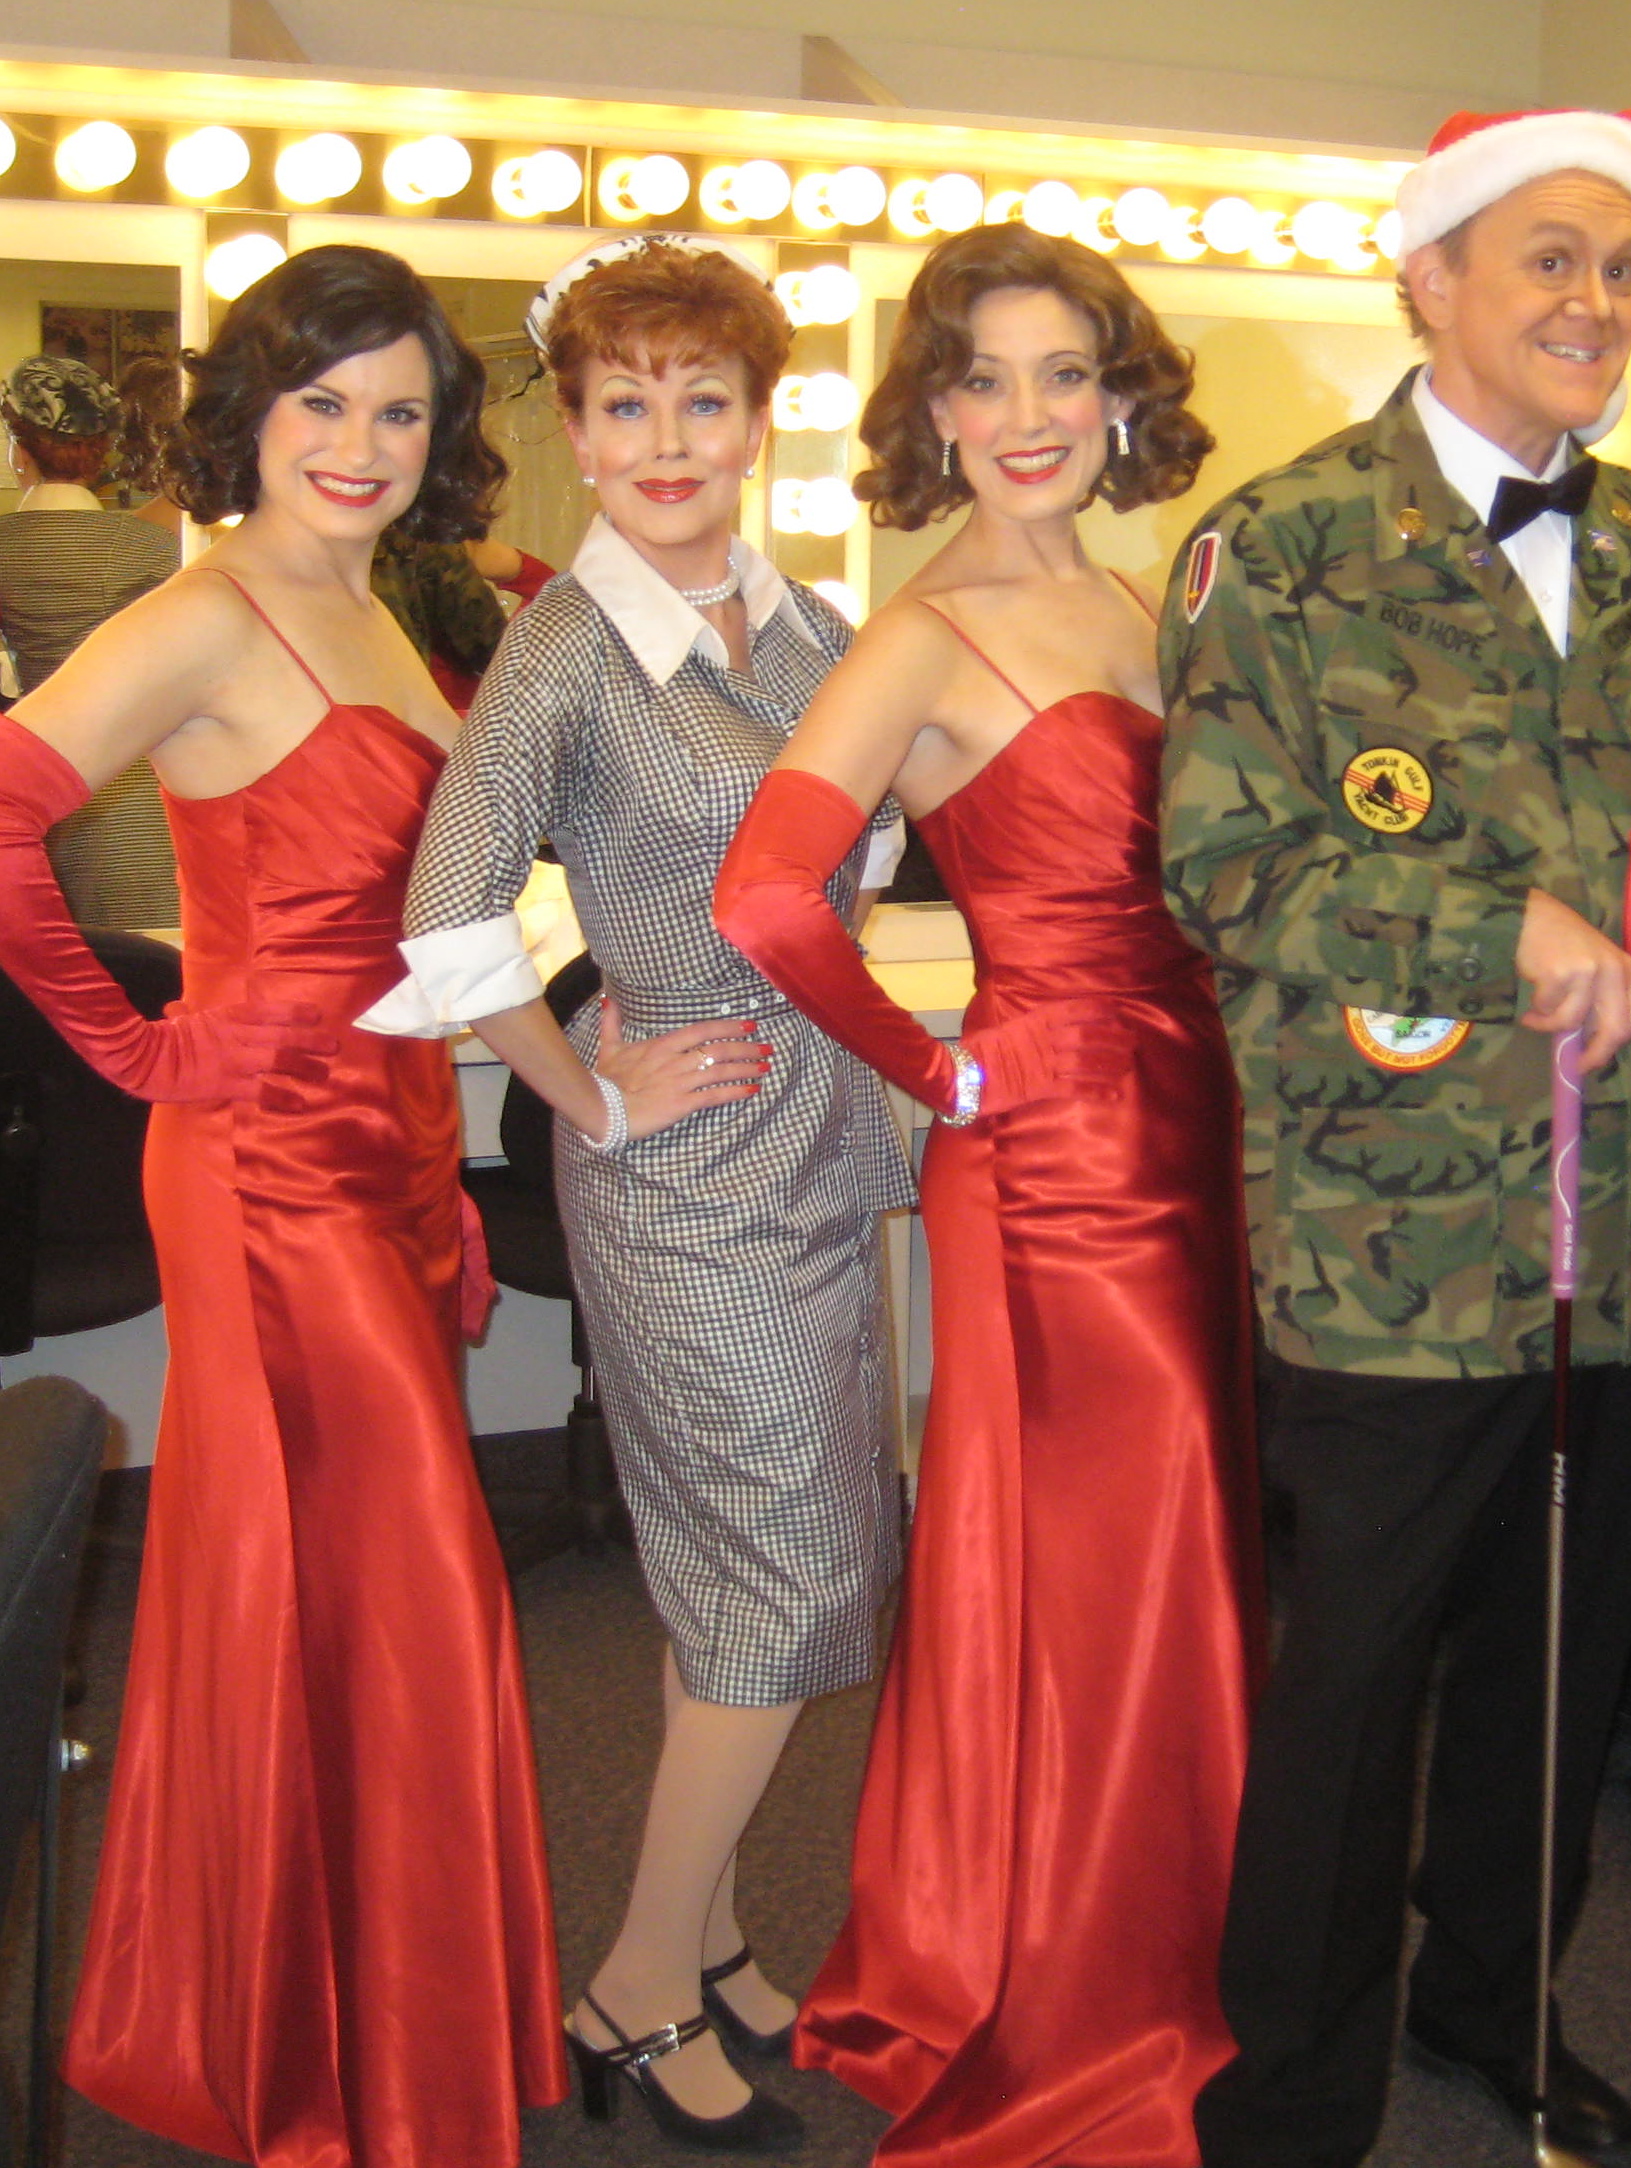 The McGuire Sisters, Bob, and Lucy! Holiday show at Turning Point Casino